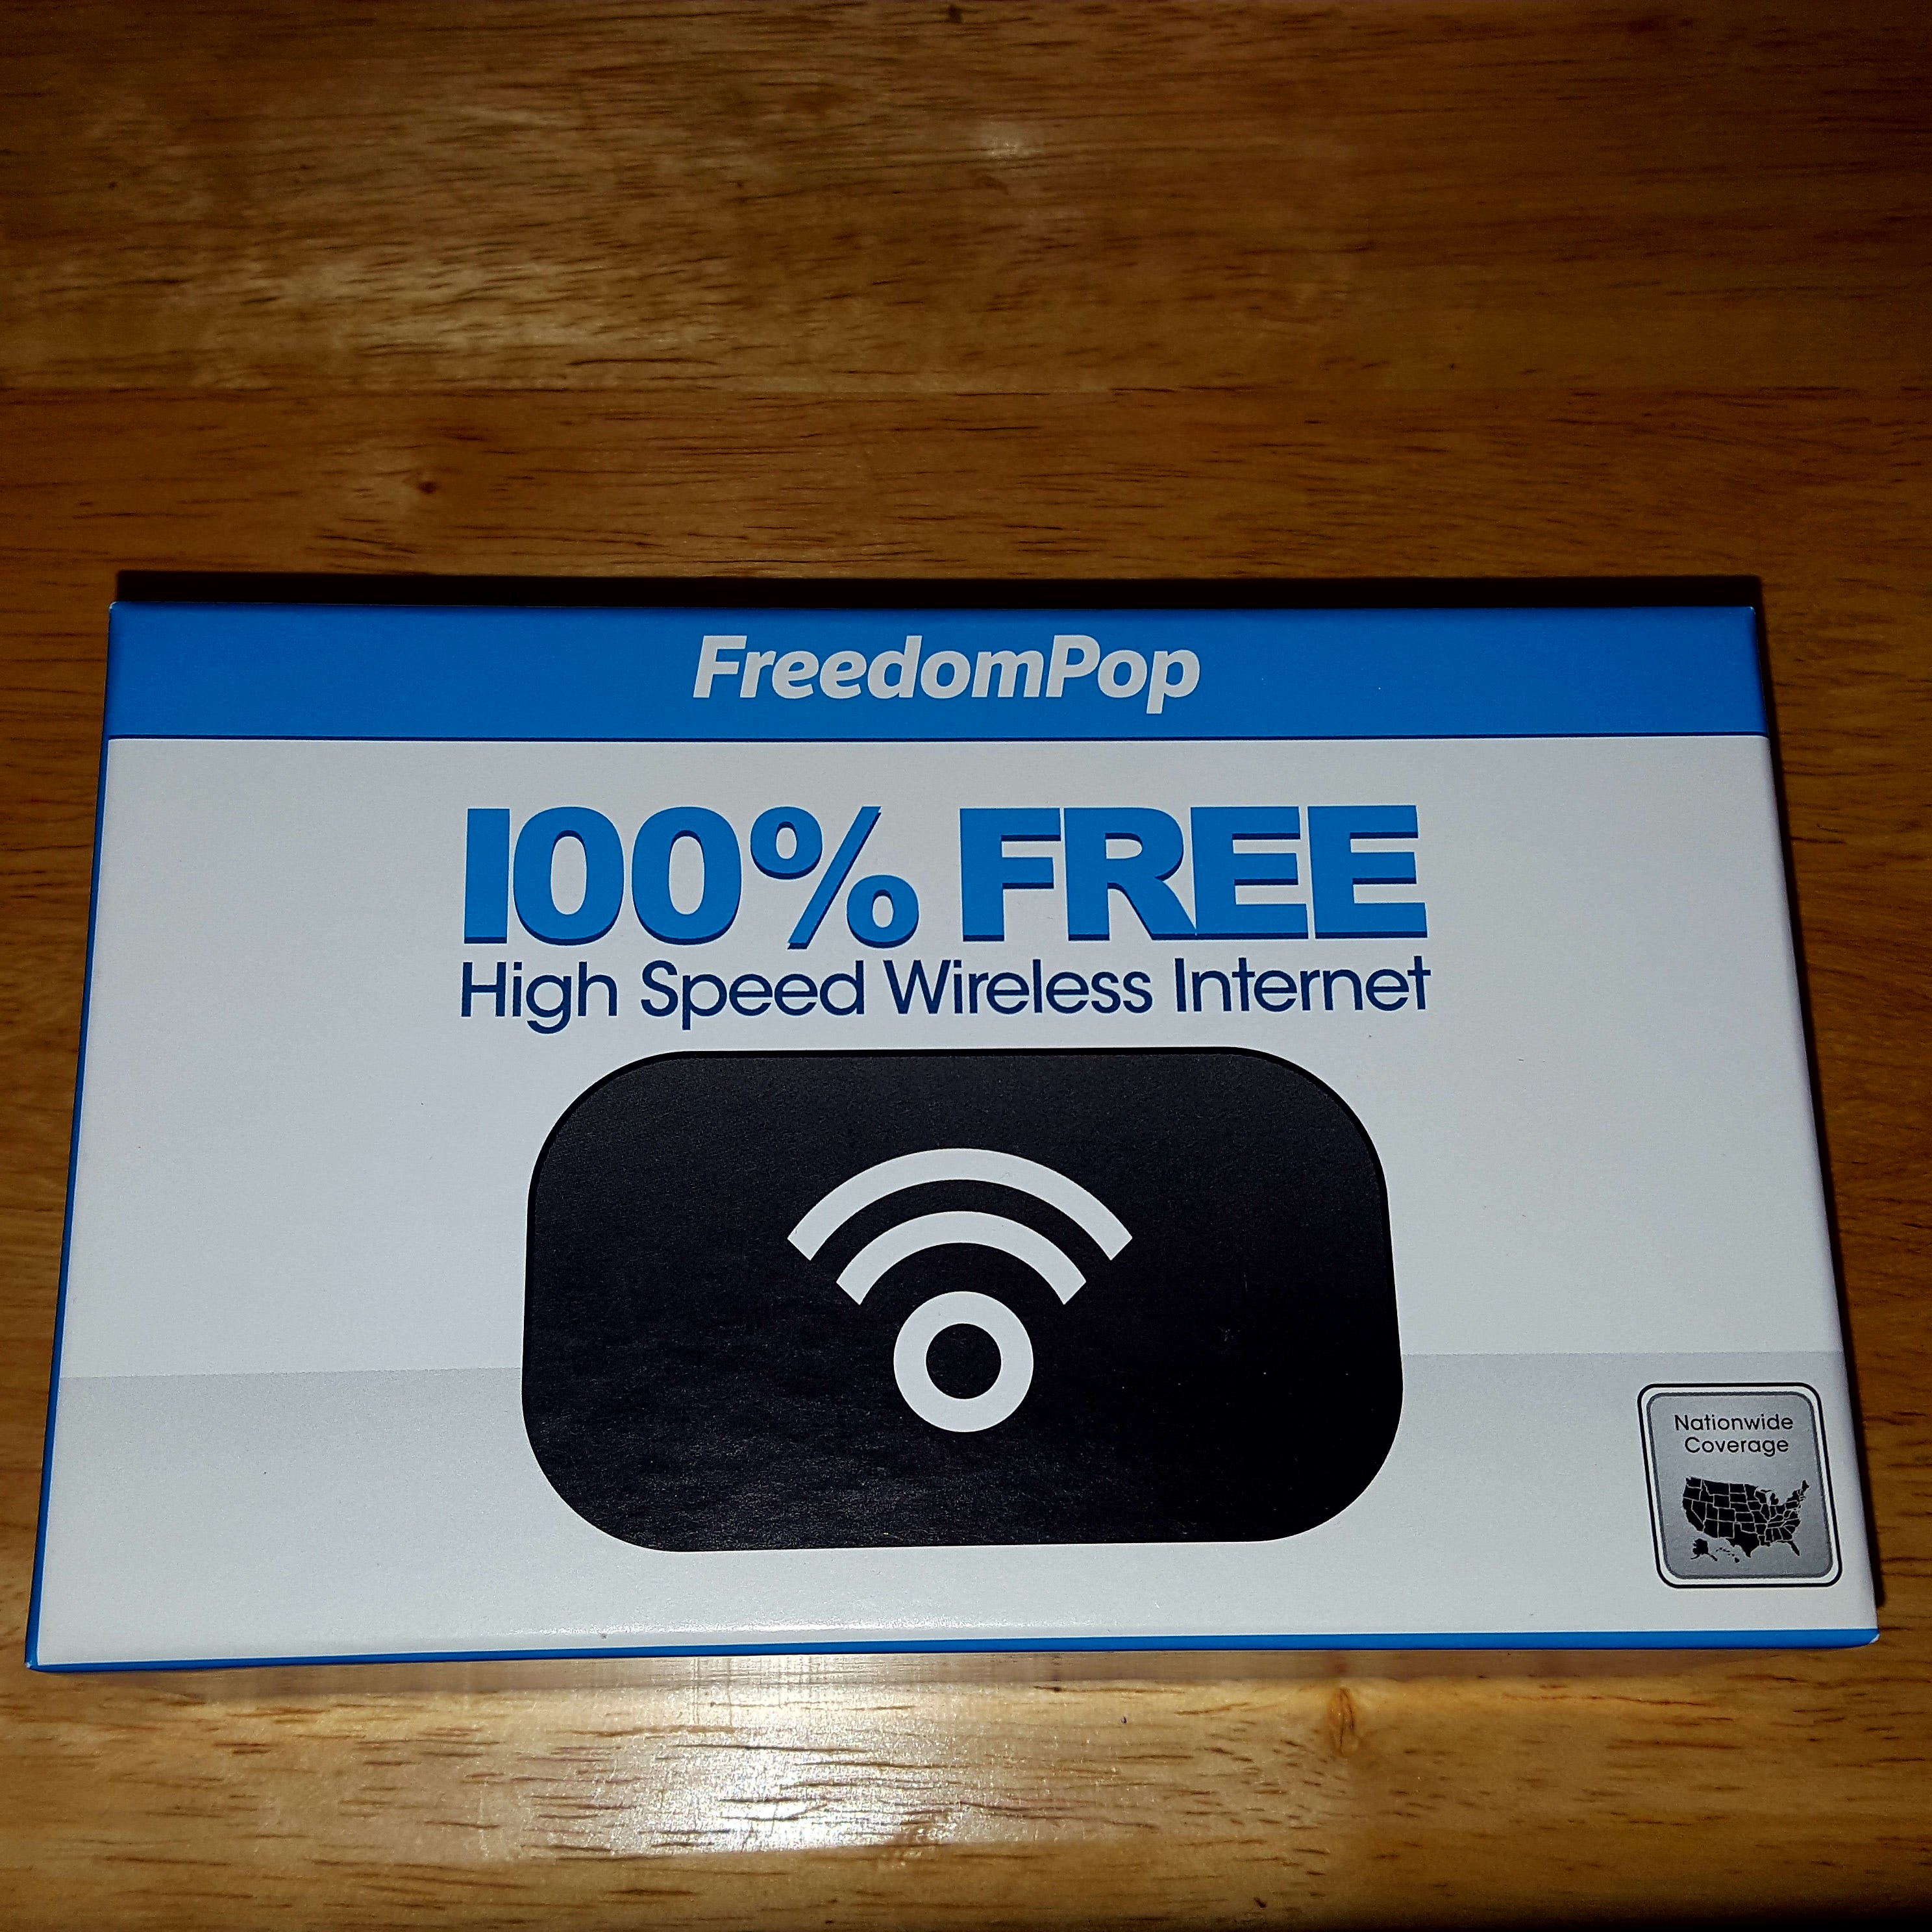 100% Free is a lie regardless if you use the Hotspot device or not. In my case I never used the device one time!!!!